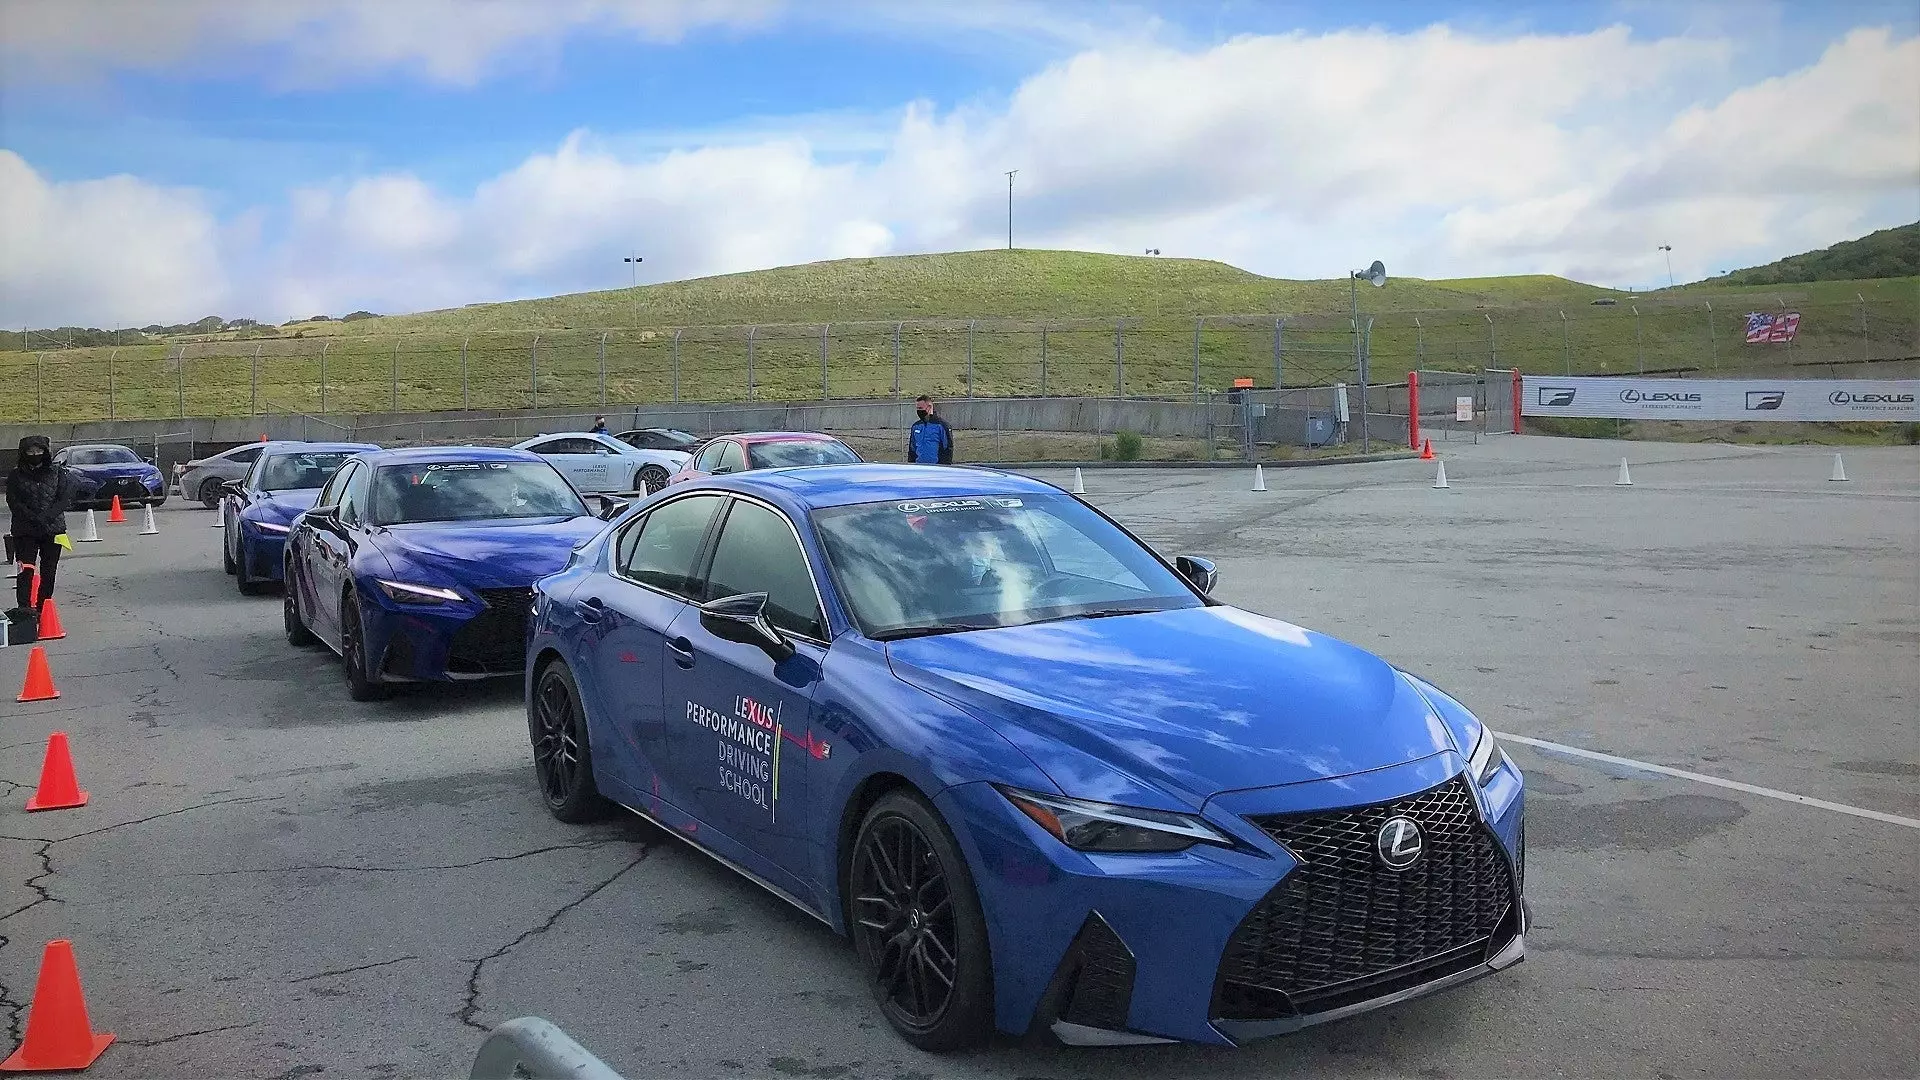 A Slow Autocross Course Hones Precision Driving Skills Really Fast | Autance